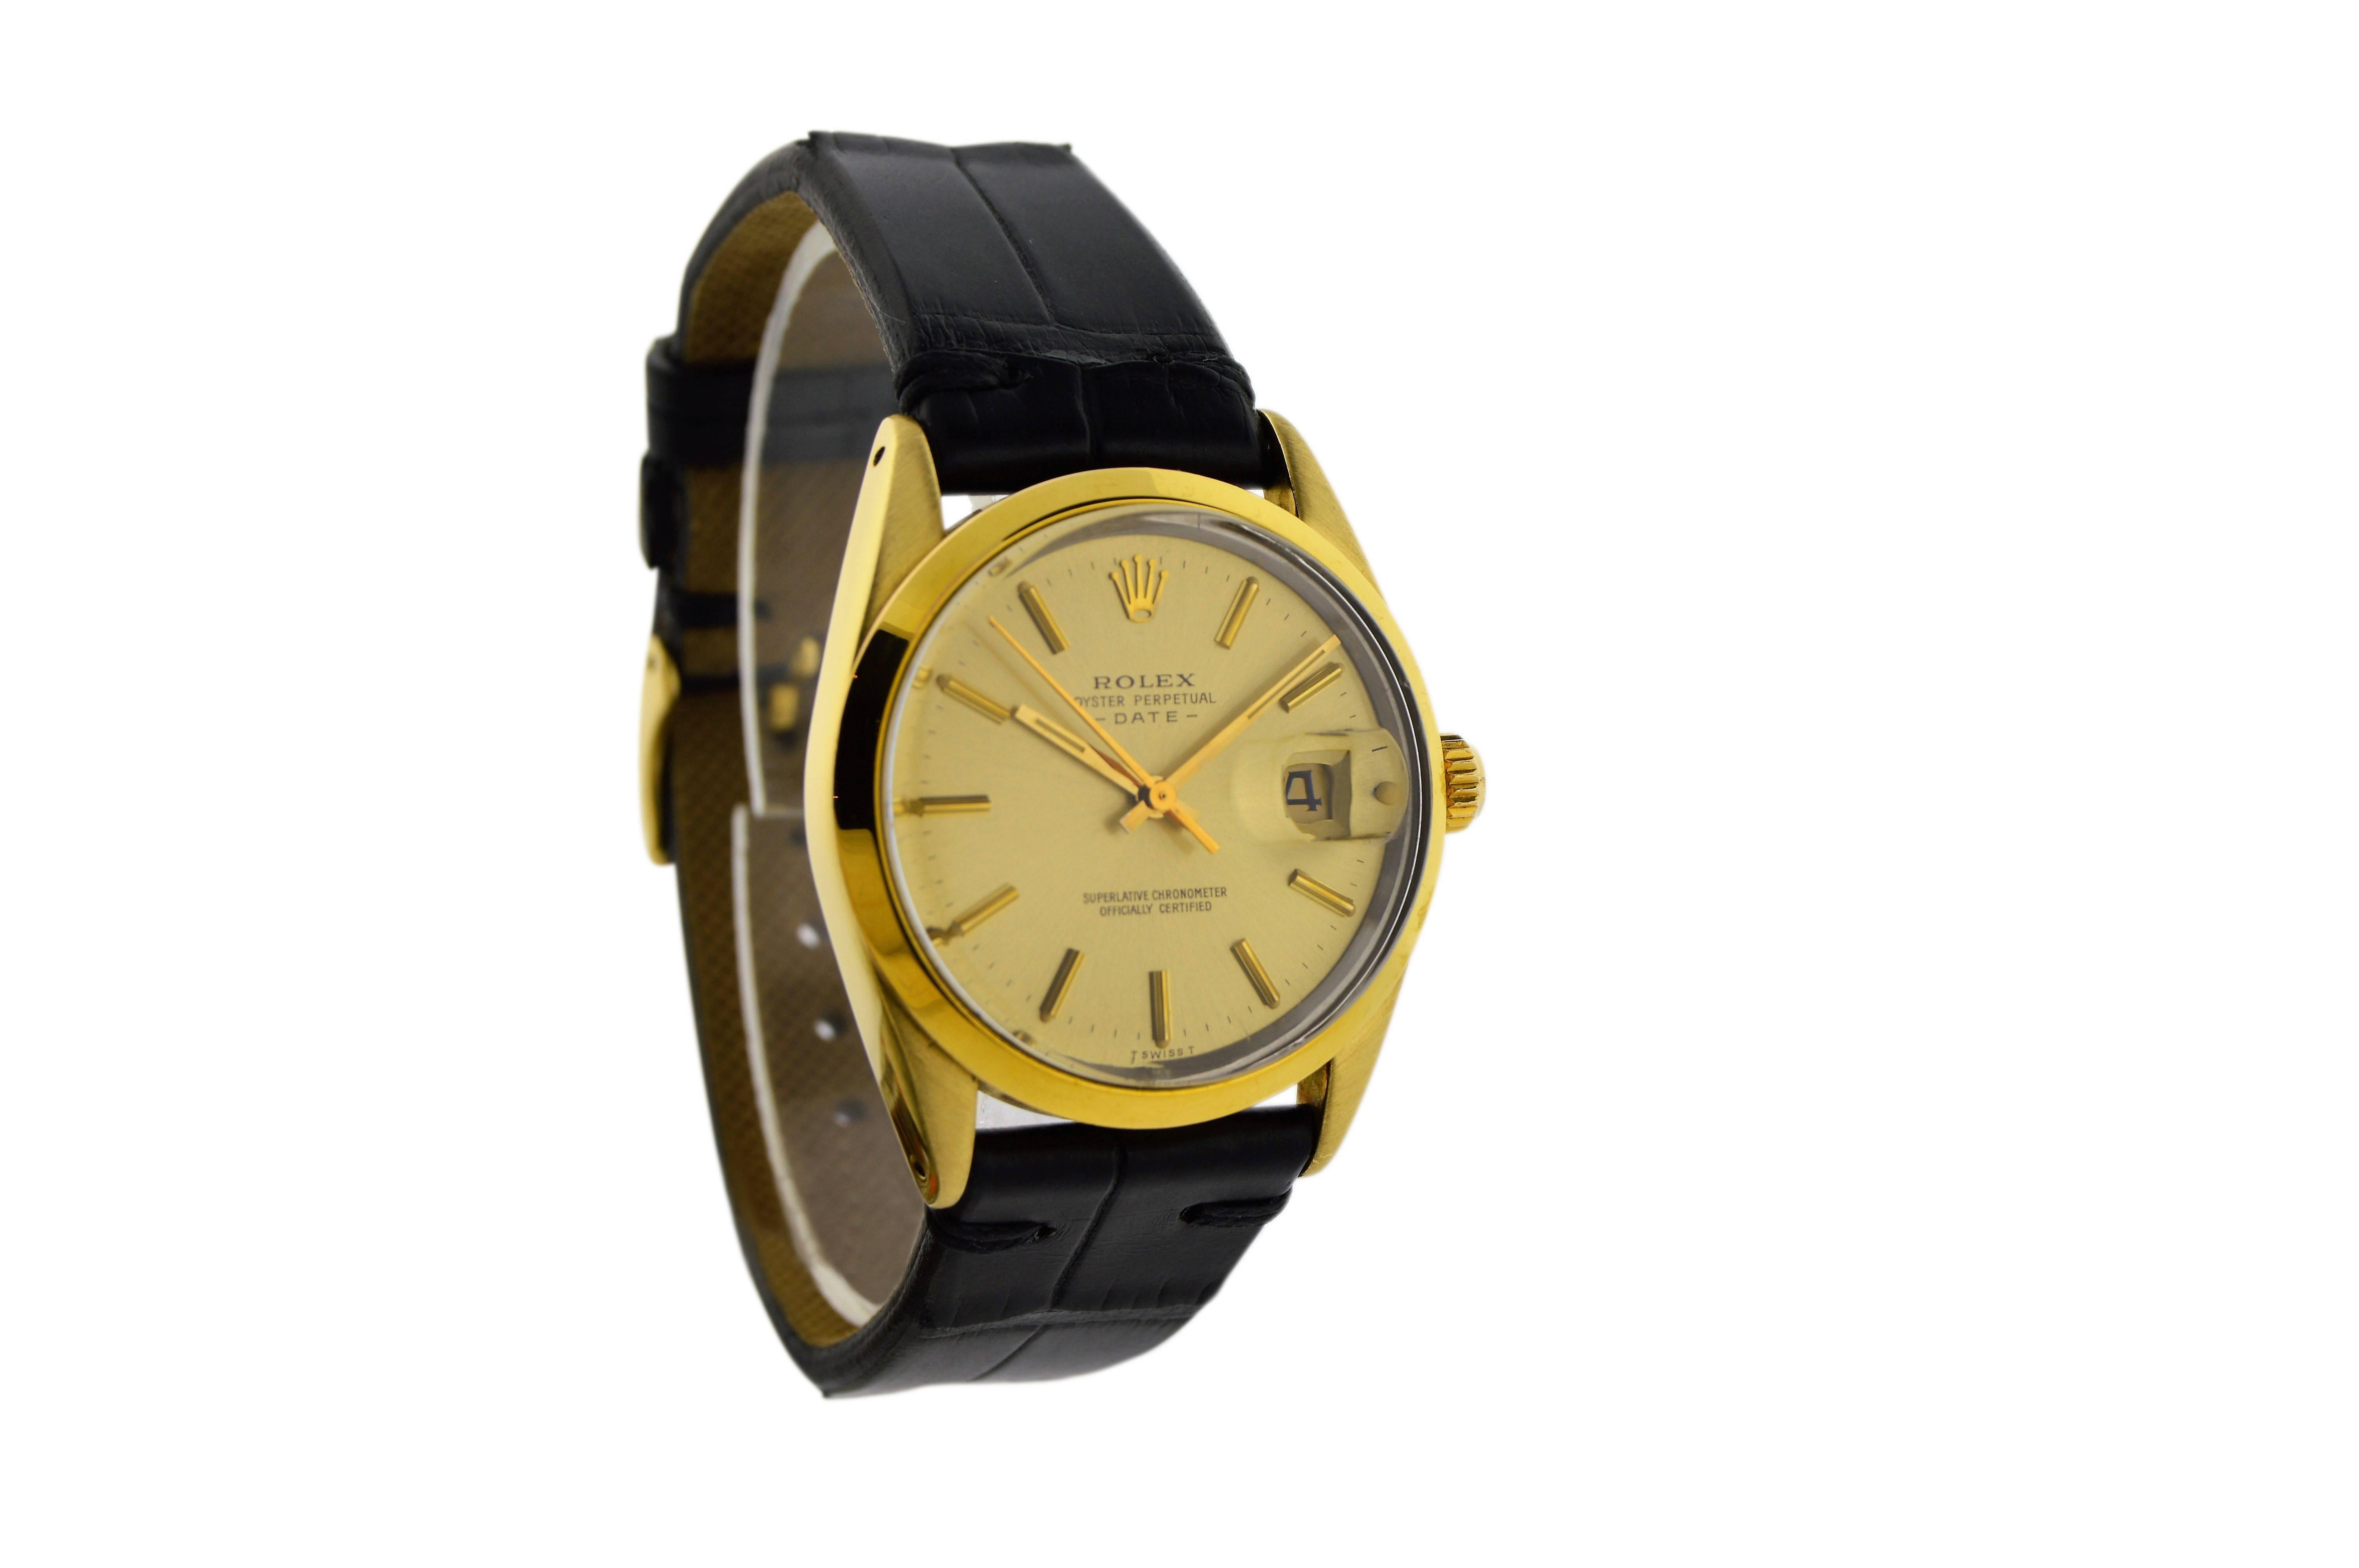 FACTORY / HOUSE: Rolex Watch Company 
STYLE / REFERENCE: Oyster Perpetual / Date / Ref. 15505
METAL / MATERIAL: Steel w/ Solid Gold Shell Top 
DIMENSIONS:  39mm  X  34mm
CIRCA: 1985/86
MOVEMENT / CALIBER: 27 Jewels / Perpetual / Cal. 3035 
DIAL /